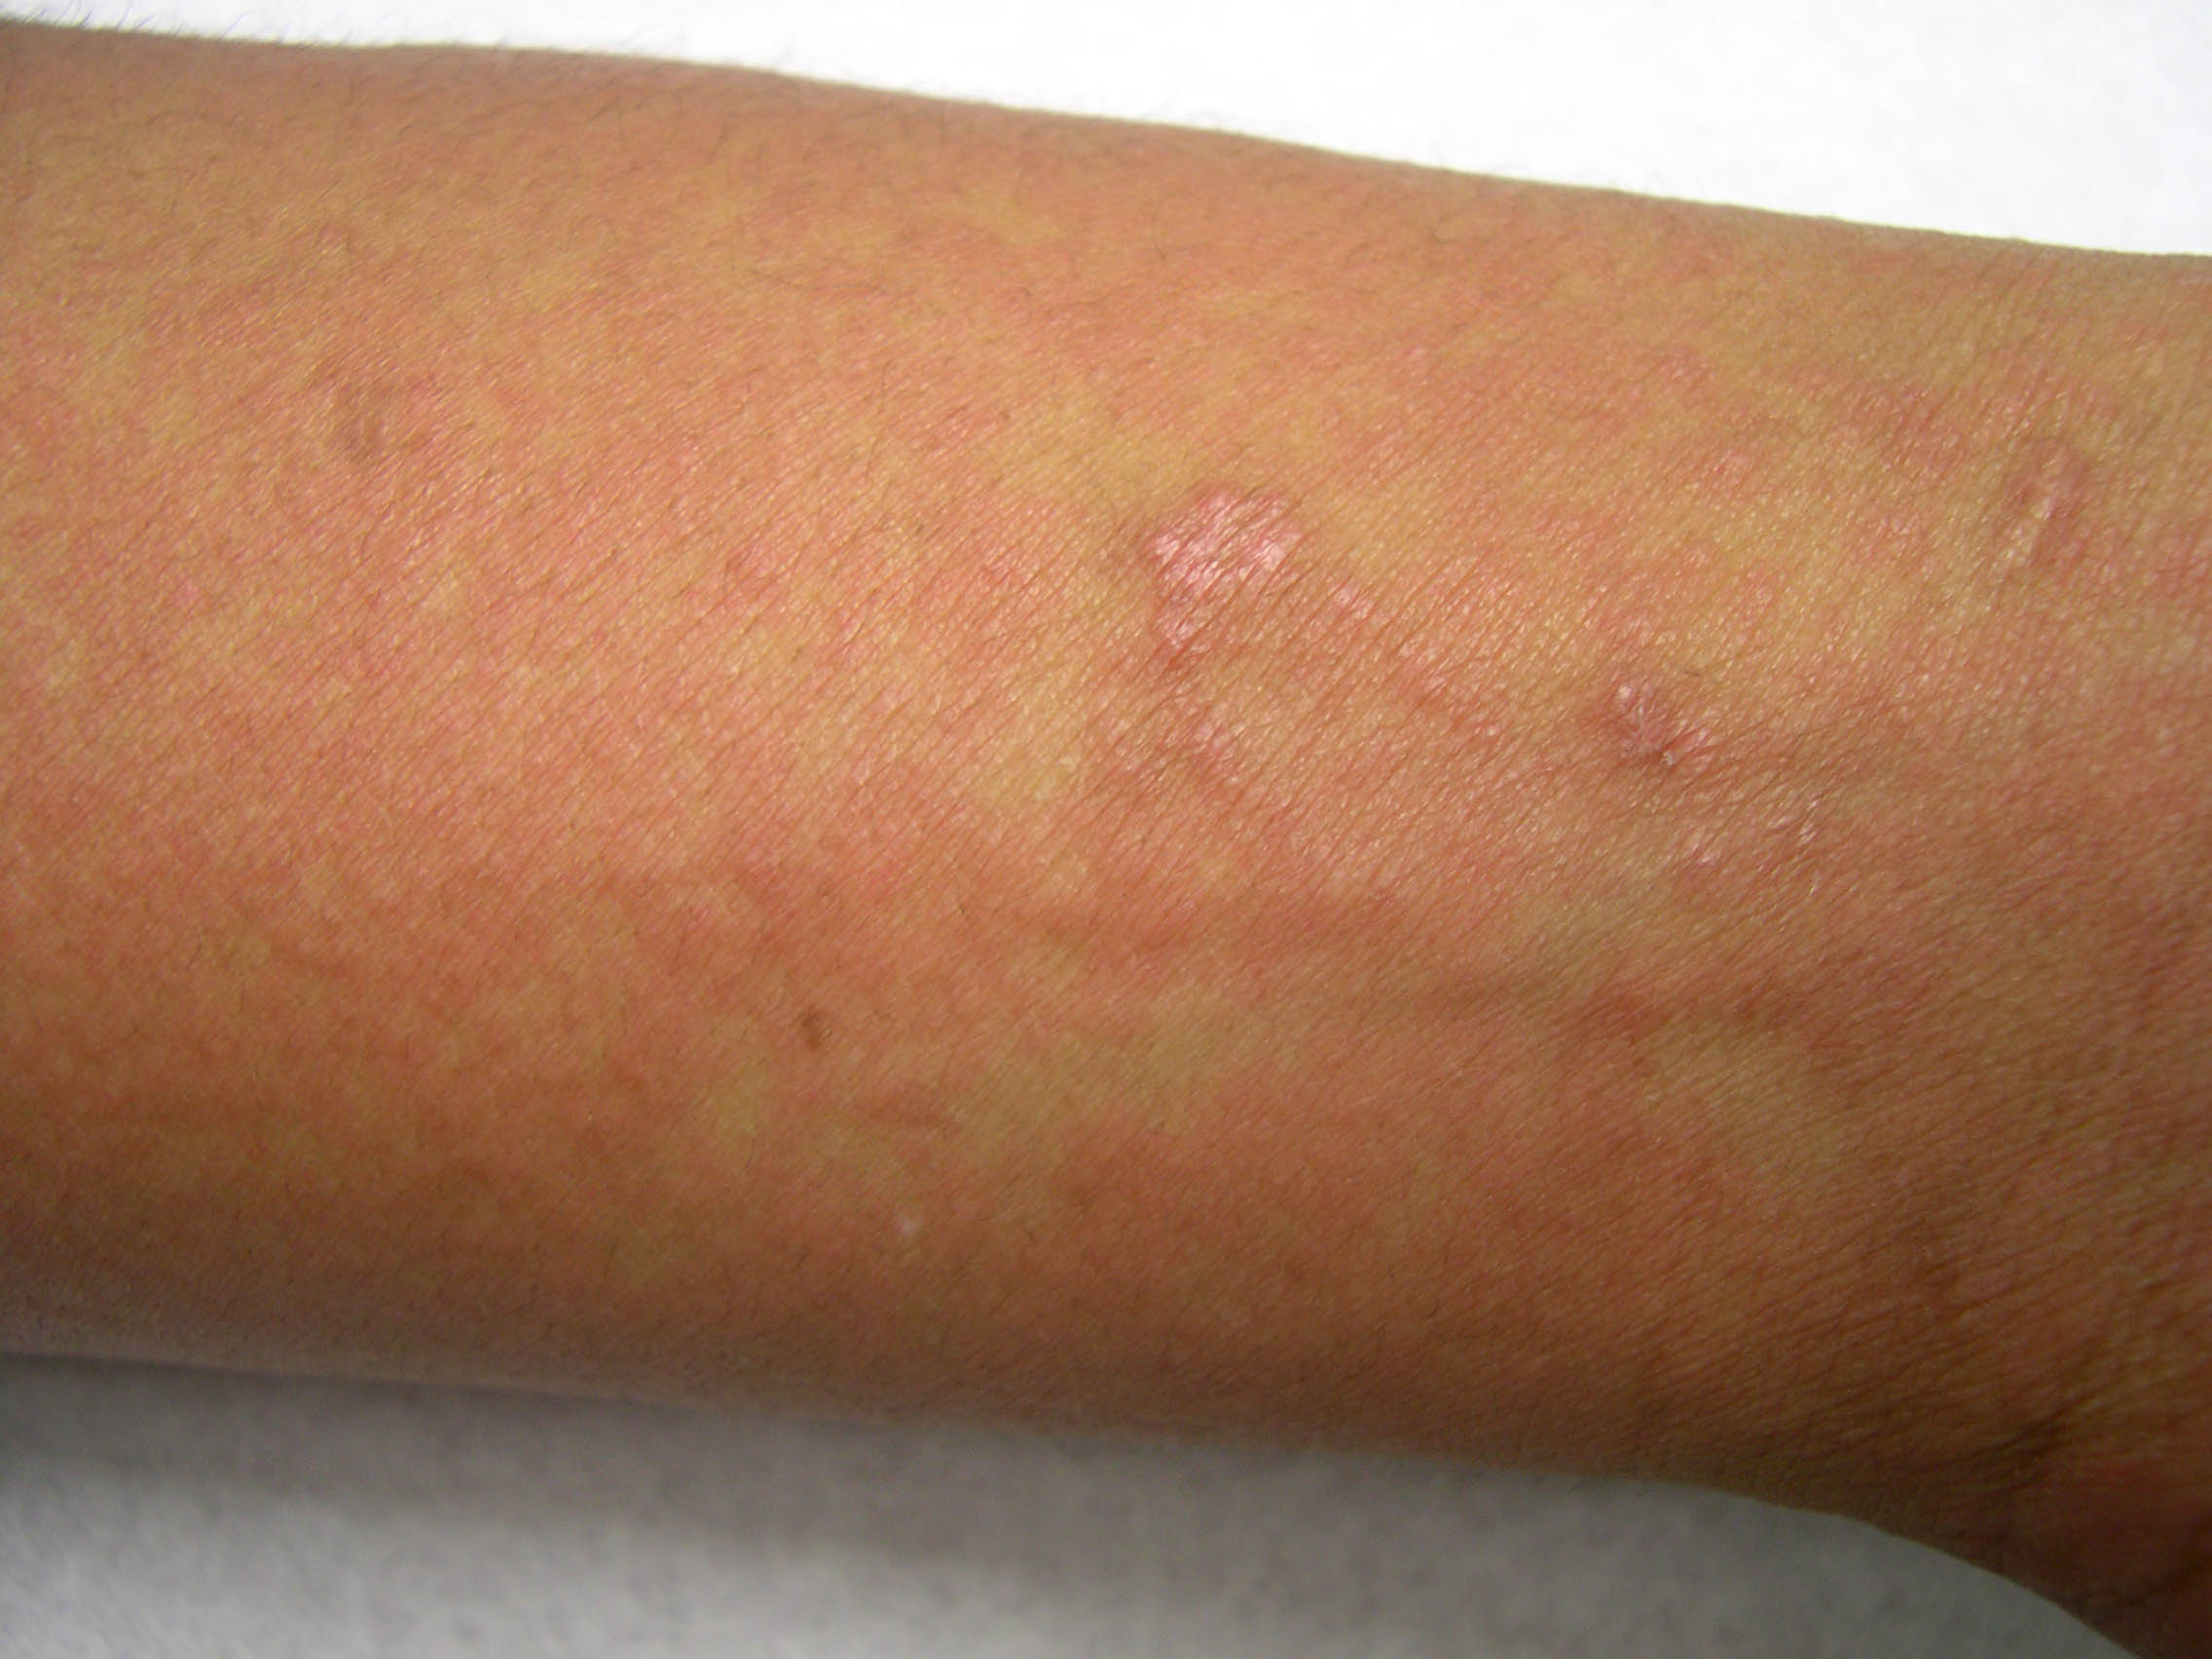 Picture of Hives (urticaria) - WebMD